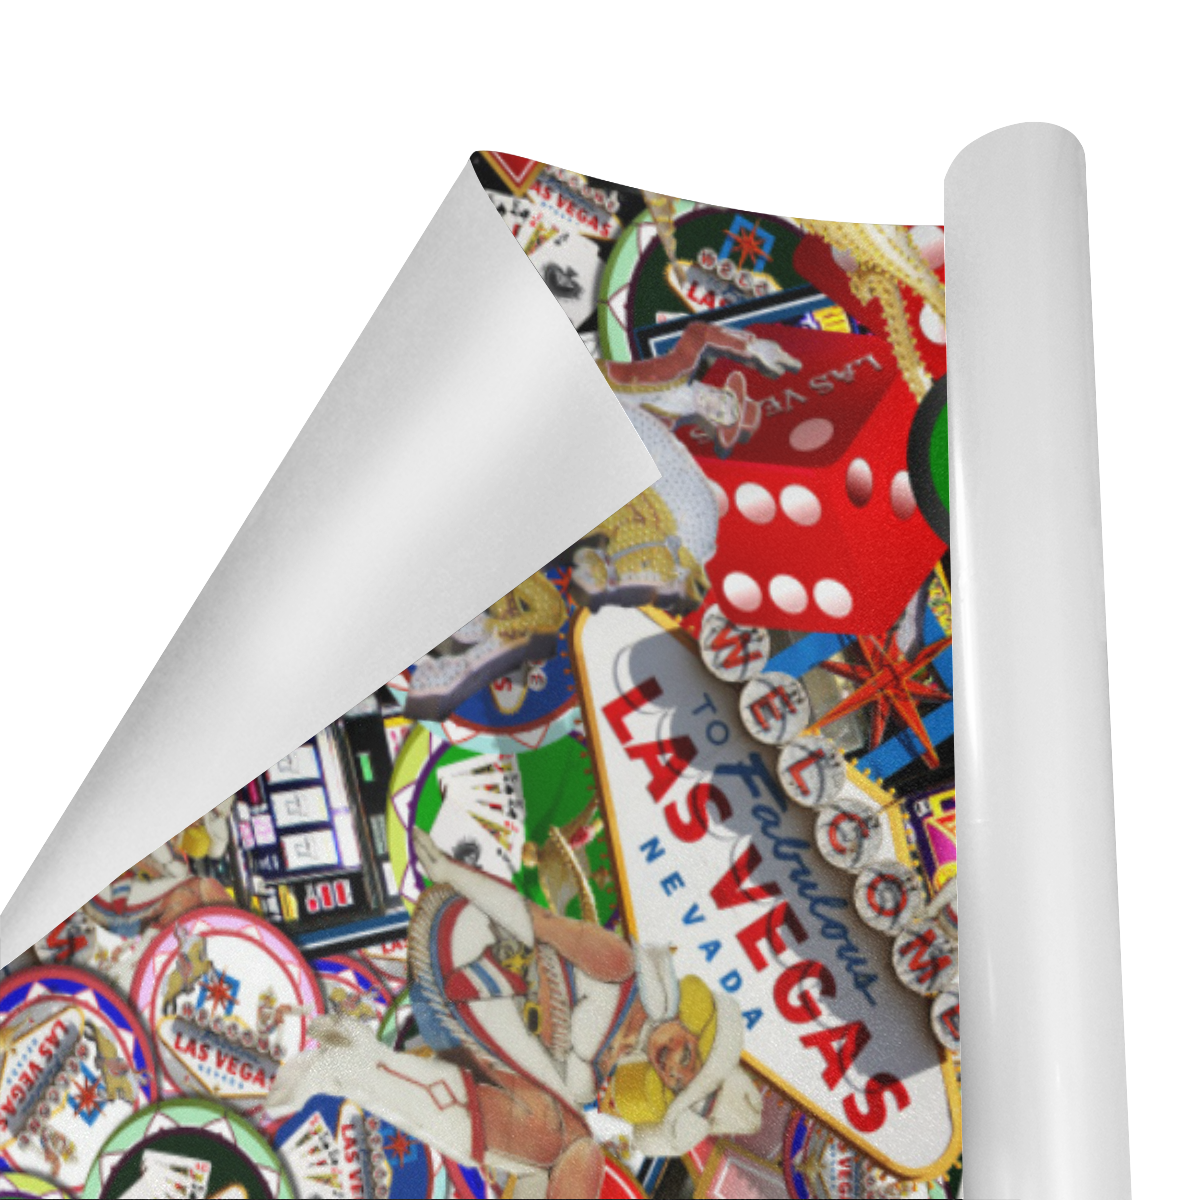 Gamblers Delight - Las Vegas Icons Gift Wrapping Paper 58"x 23" (3 Rolls)